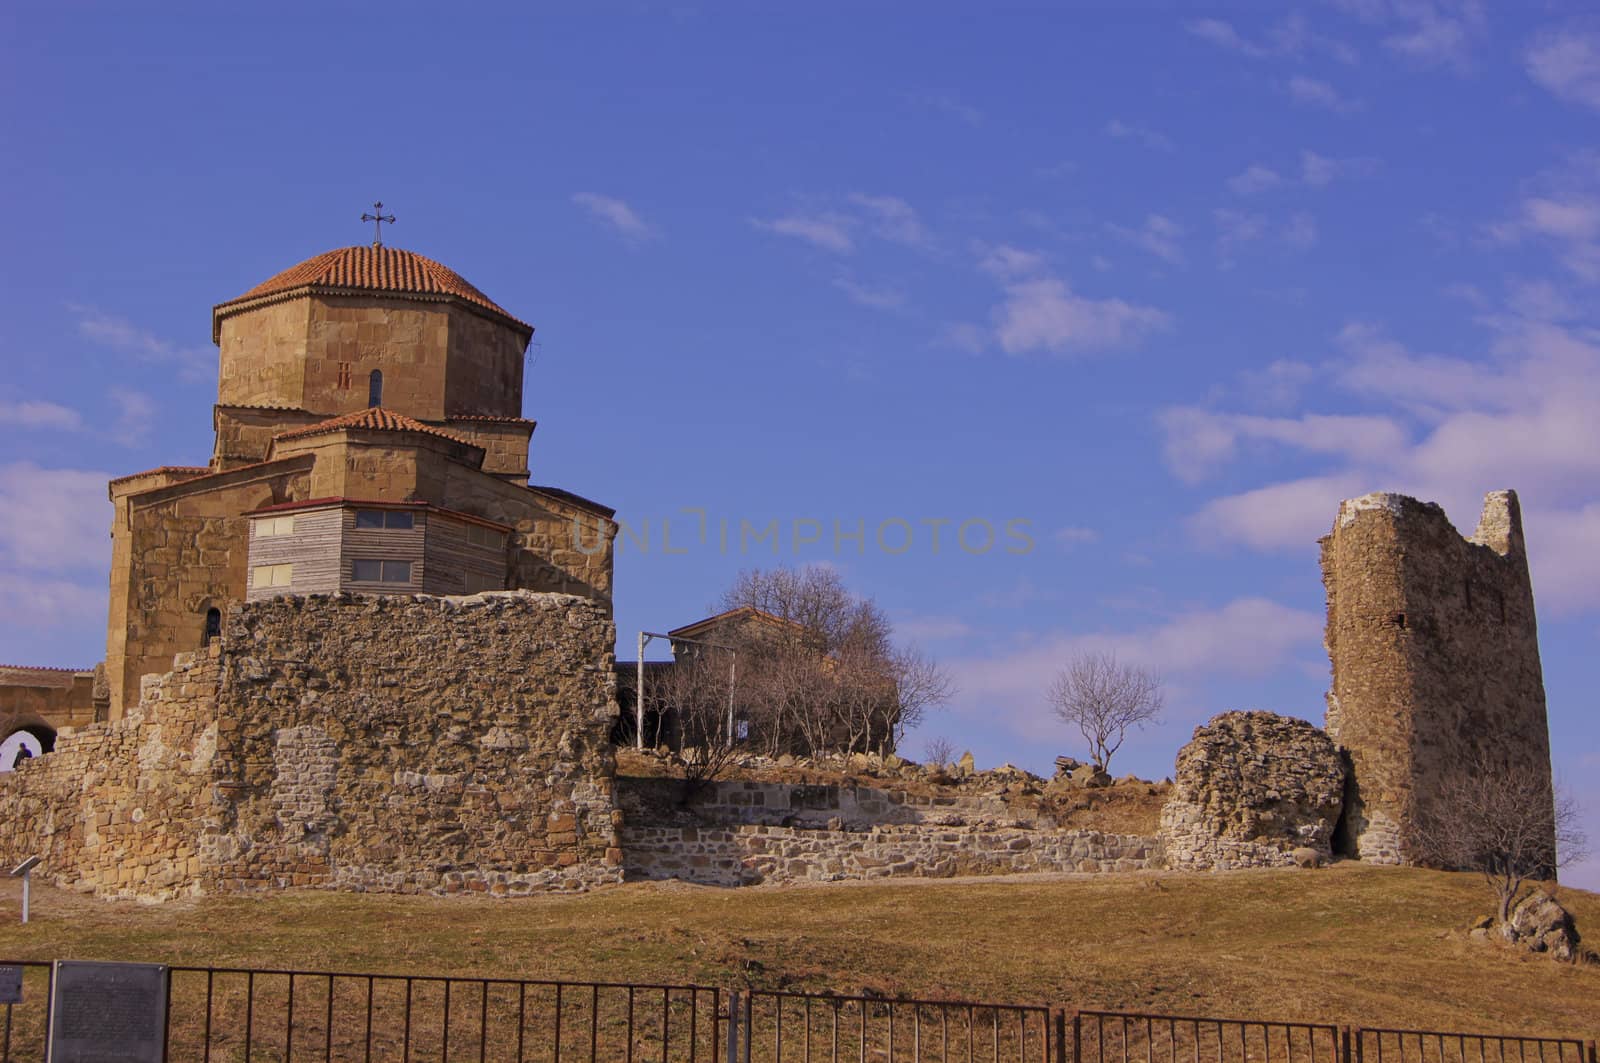 Exterior of ruins of Jvari, which is a Georgian Orthodox monastery of the 6th century near Mtskheta (World Heritage site) - the most famous symbol of georgiam christianity by Elet